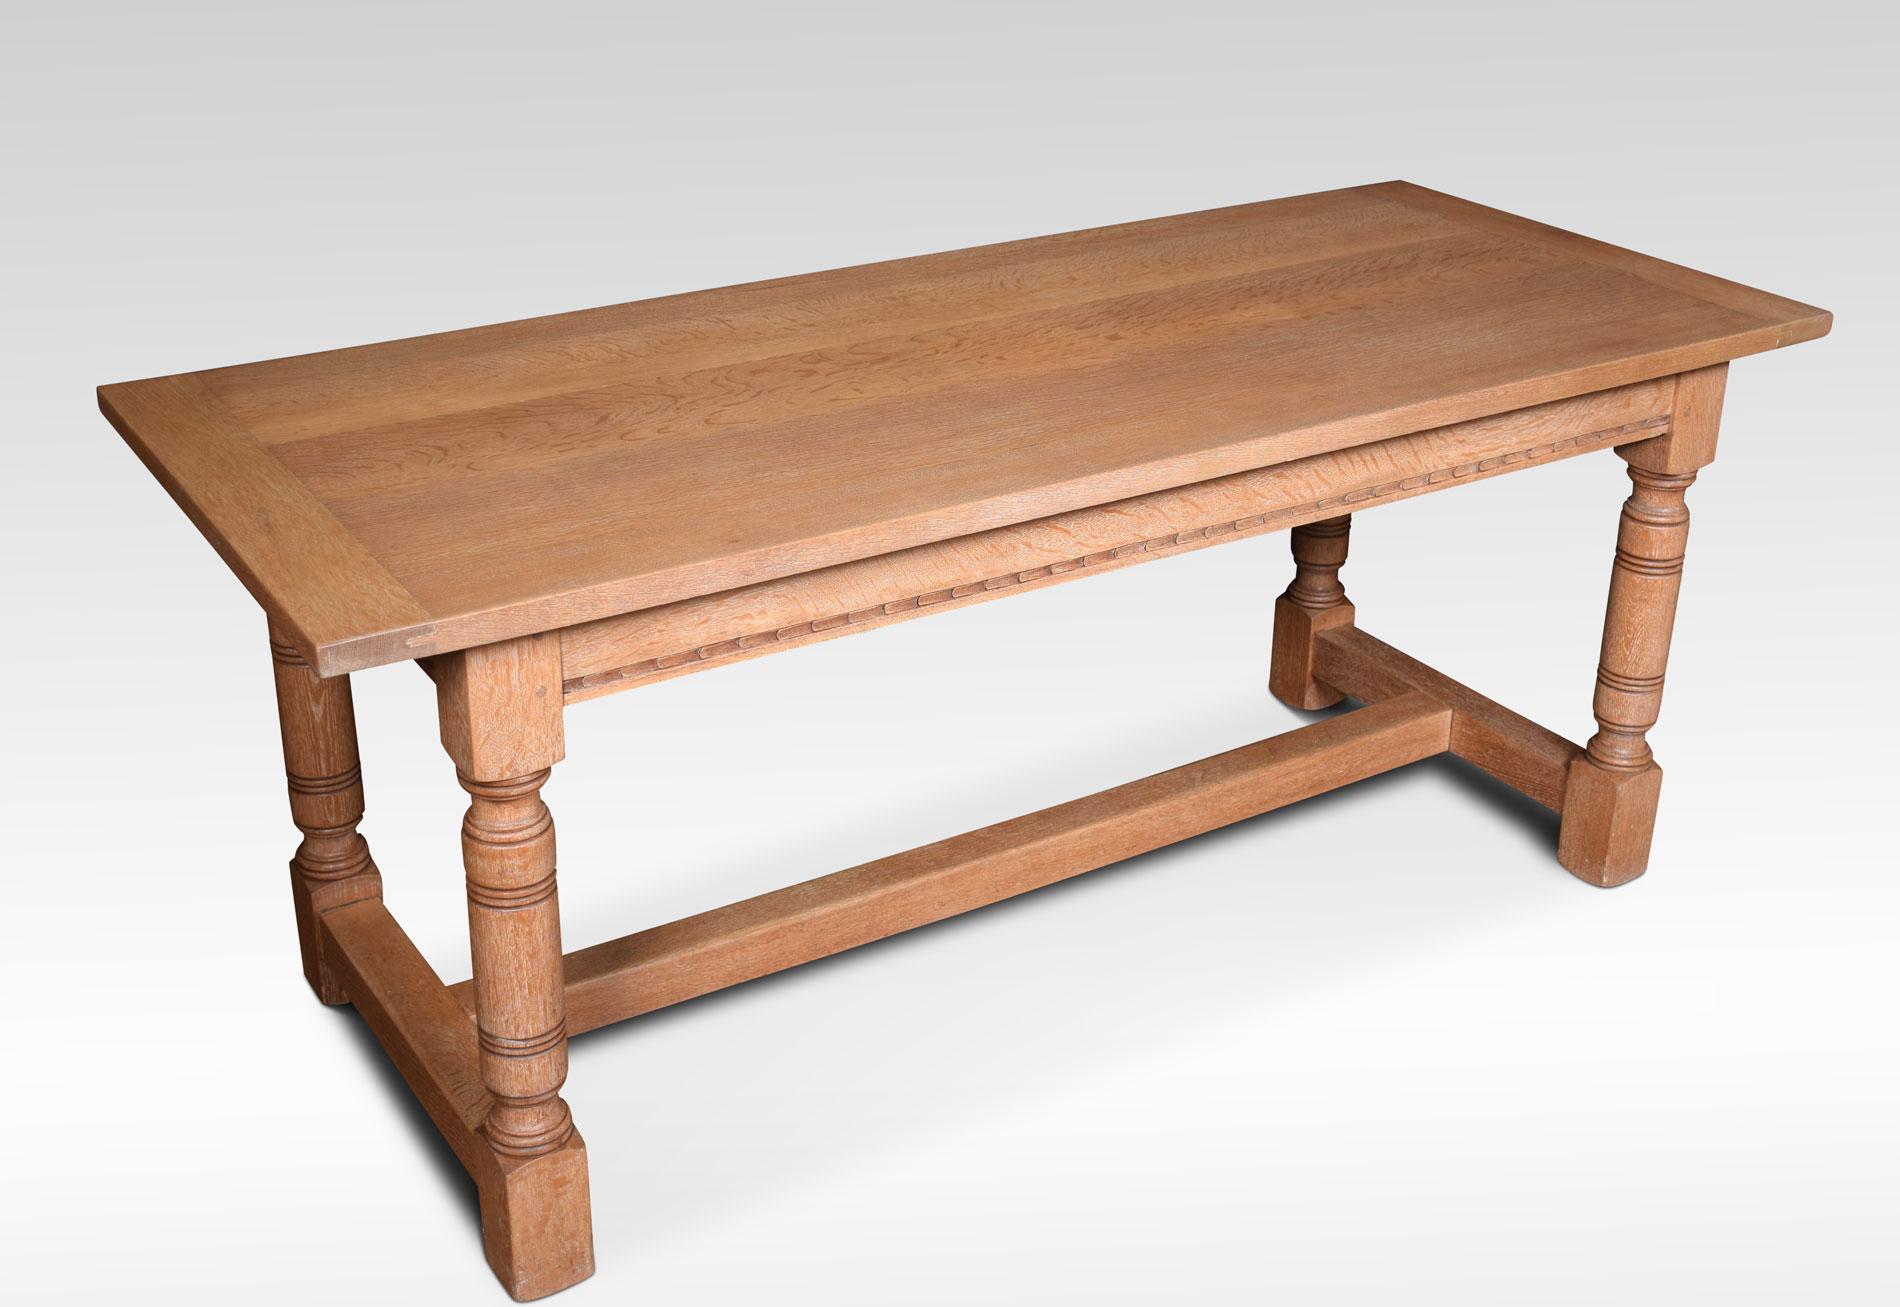 British Limed Oak Plank Top Refectory Table